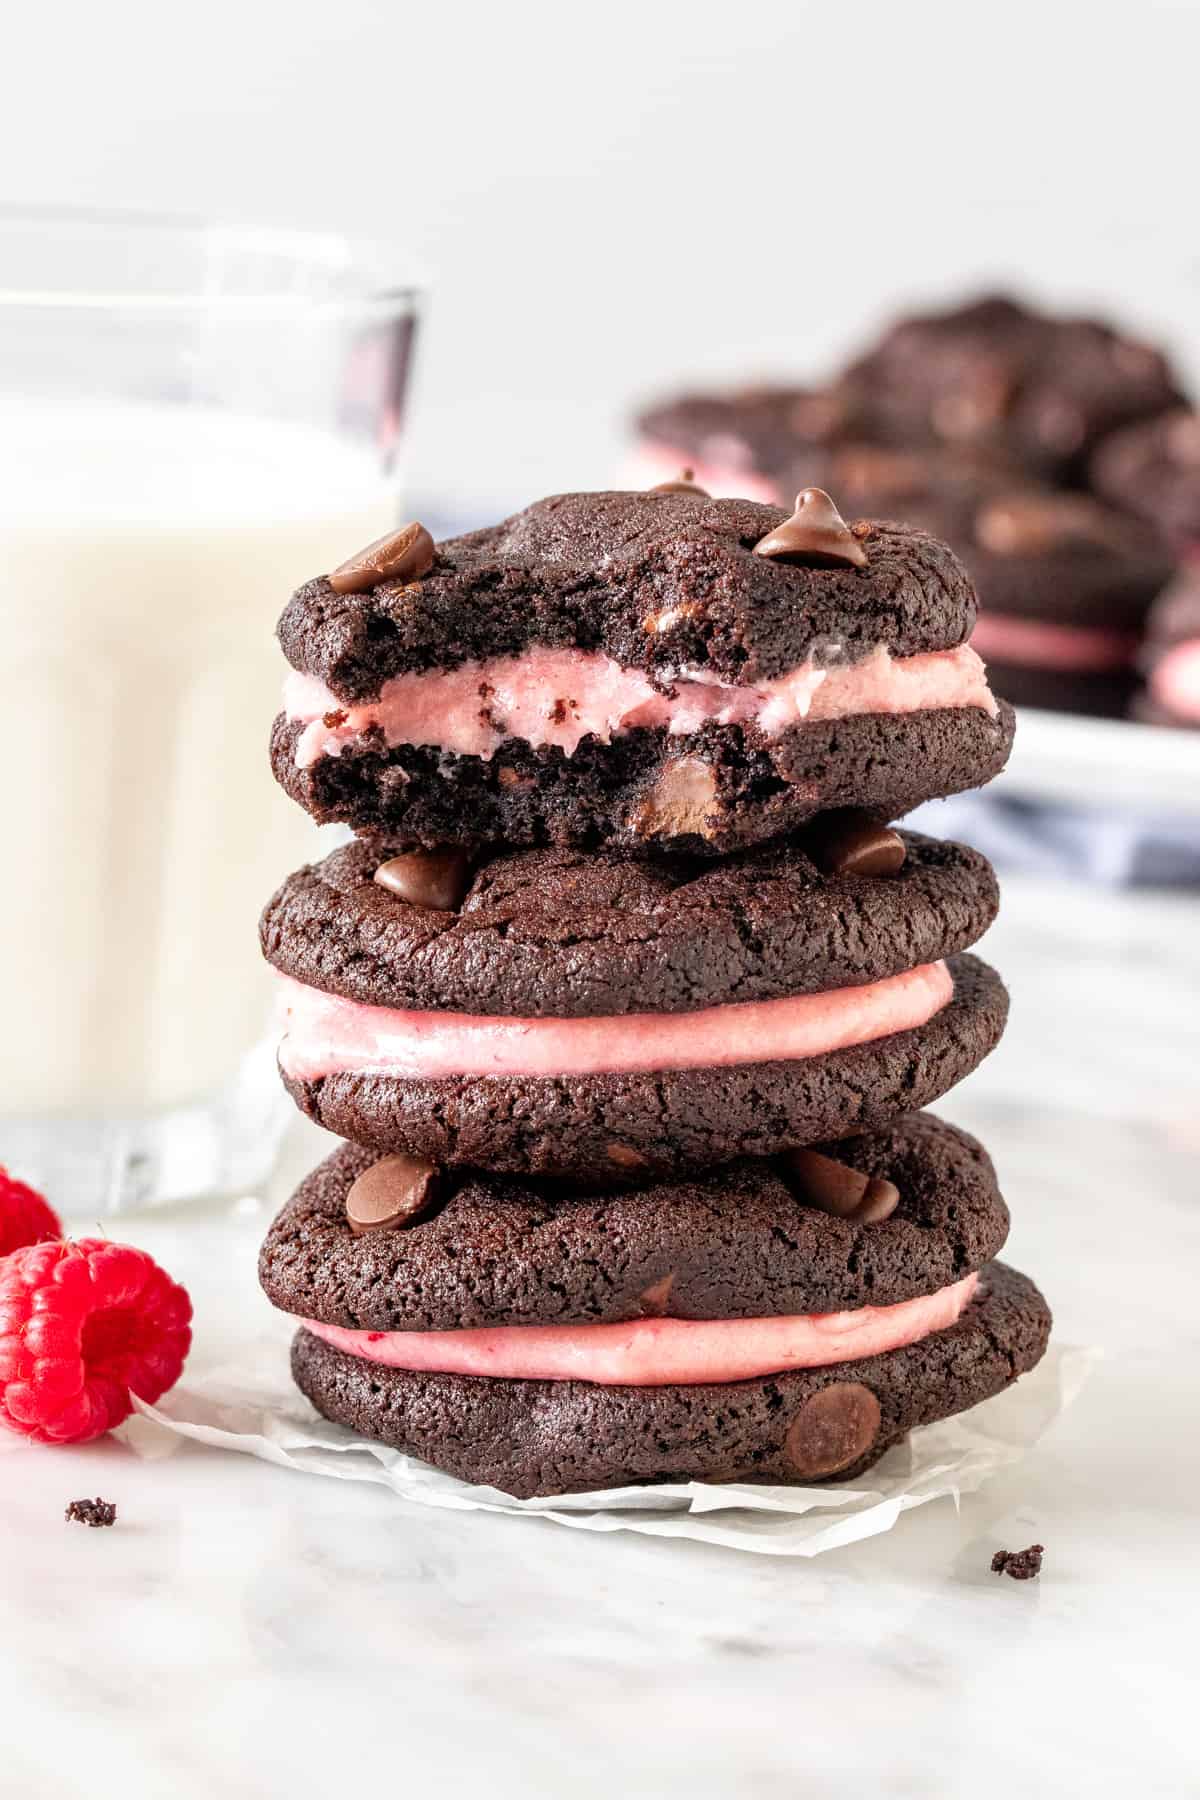 Stack of 3 chocolate cookies with raspberry frosting.